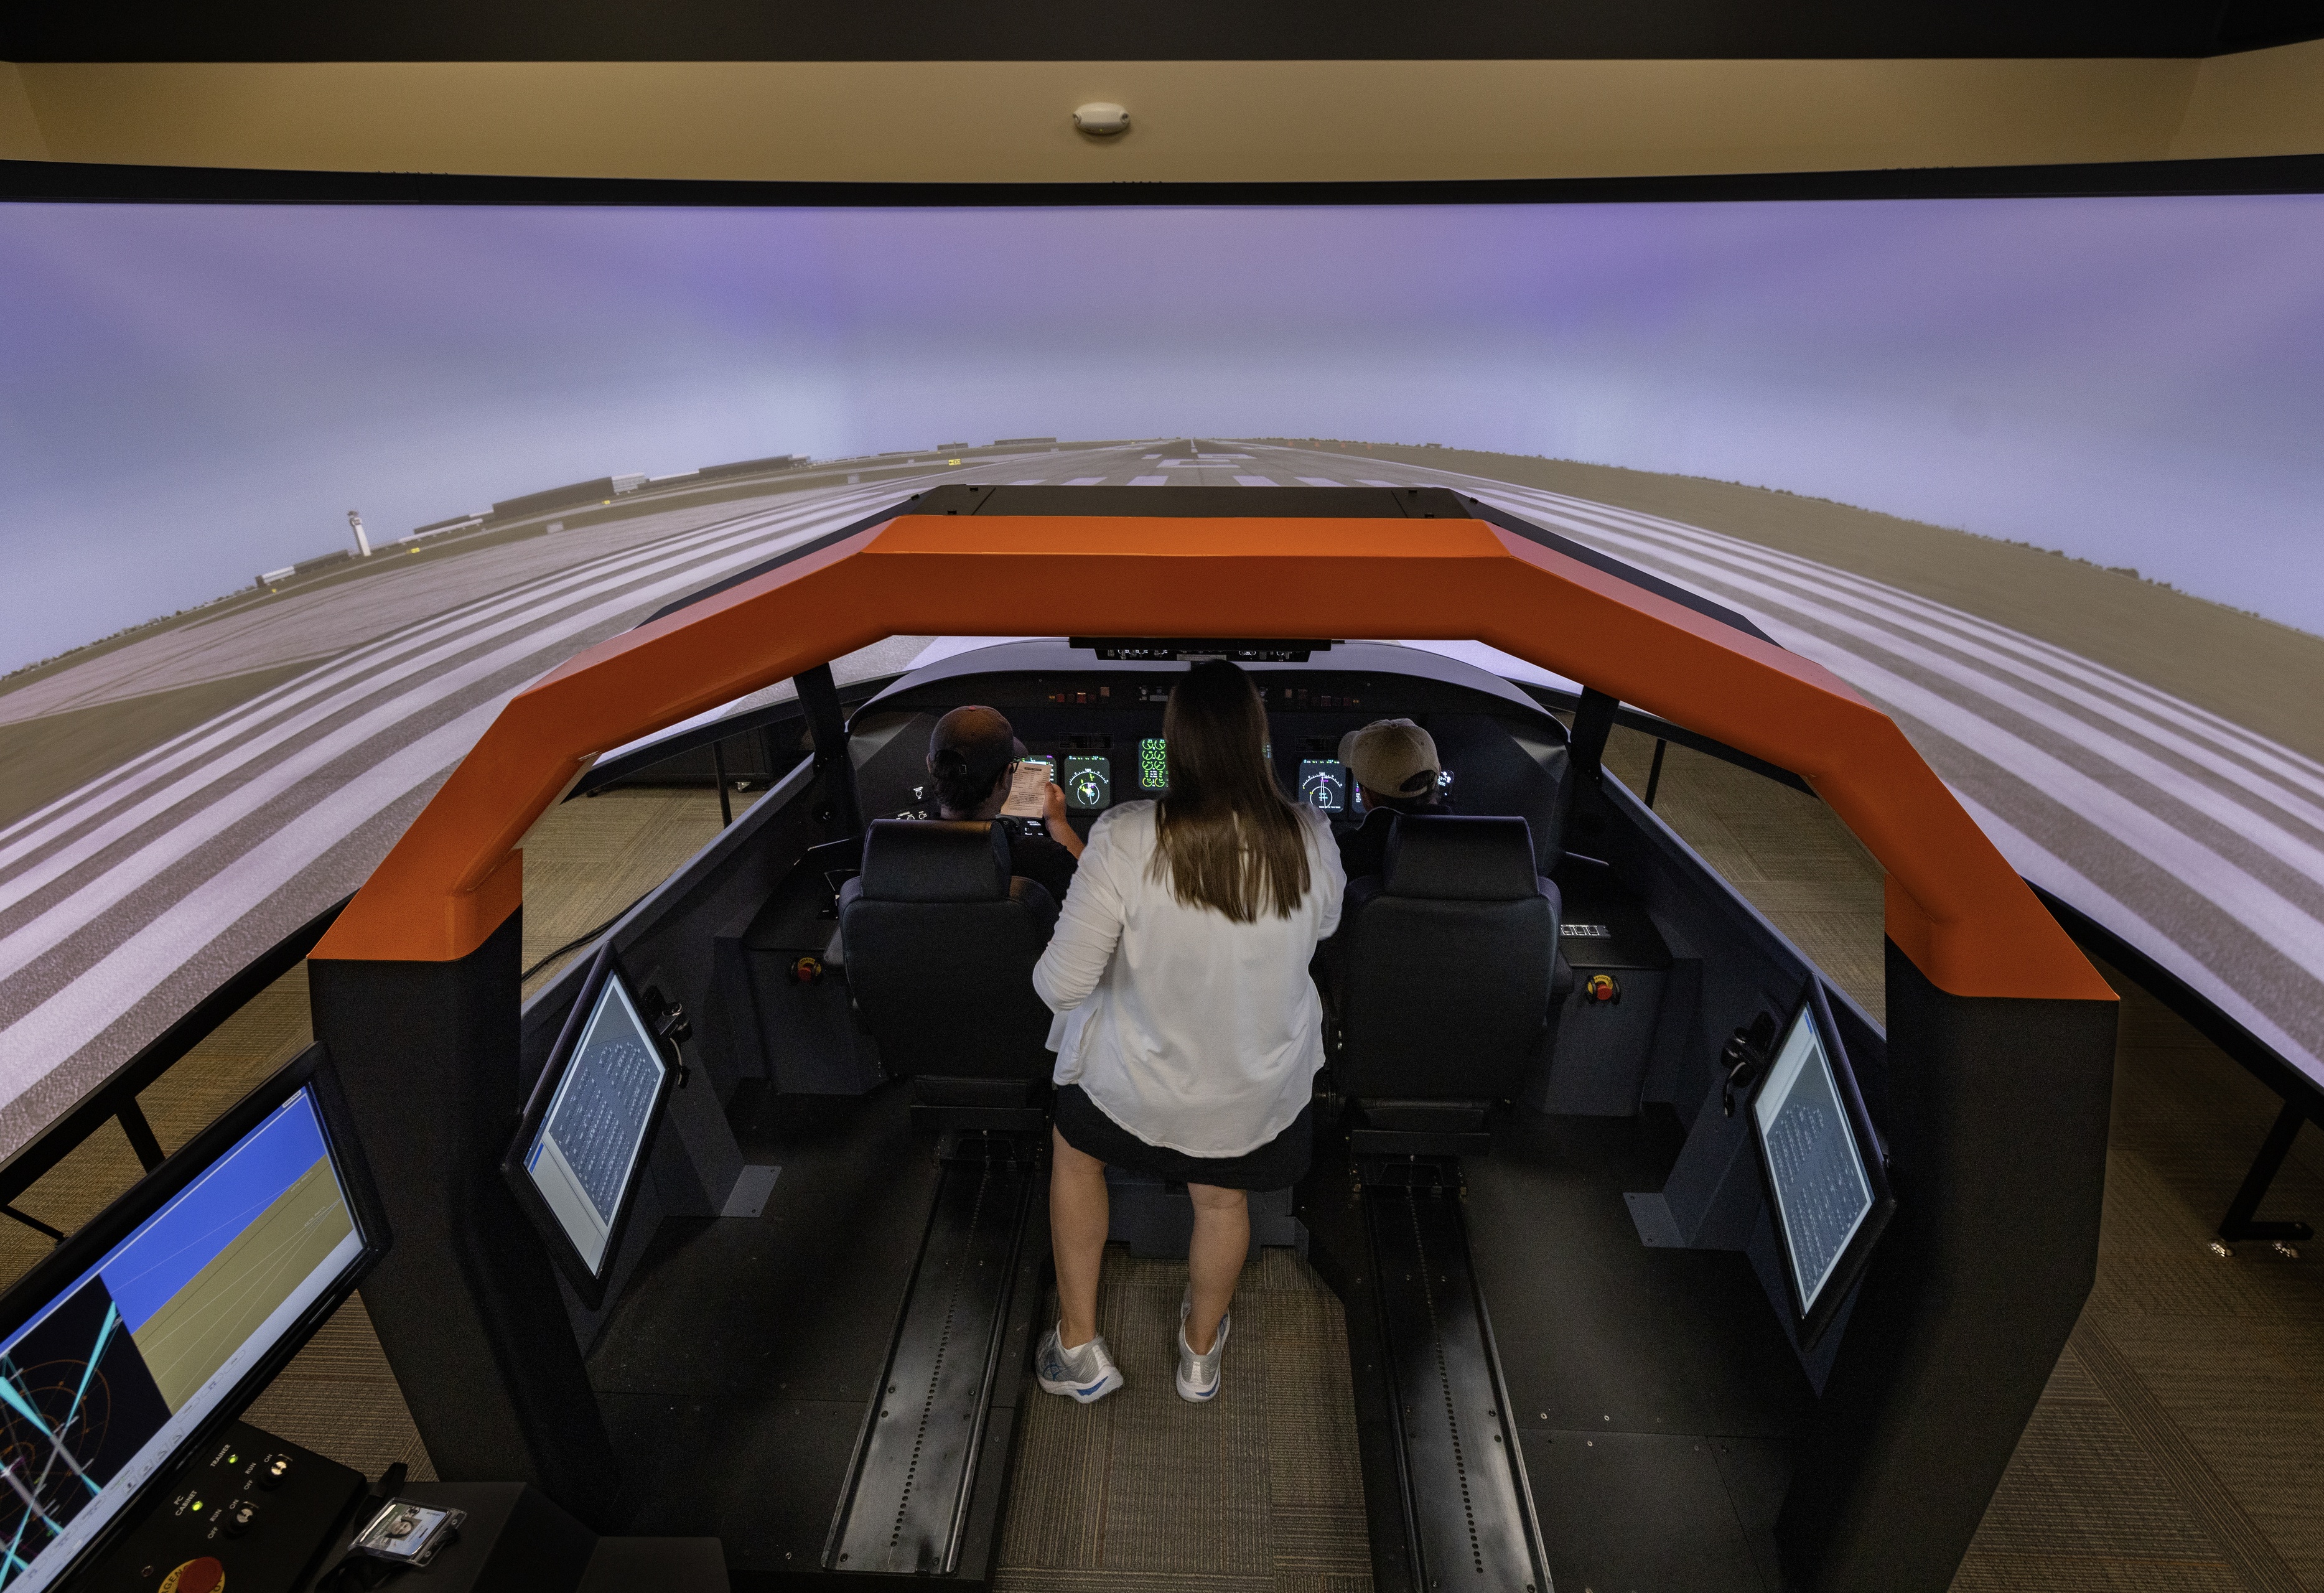 Two students and an instructor work inside flight simulator with a six-foot tall wrap around screen showing a virtual runway